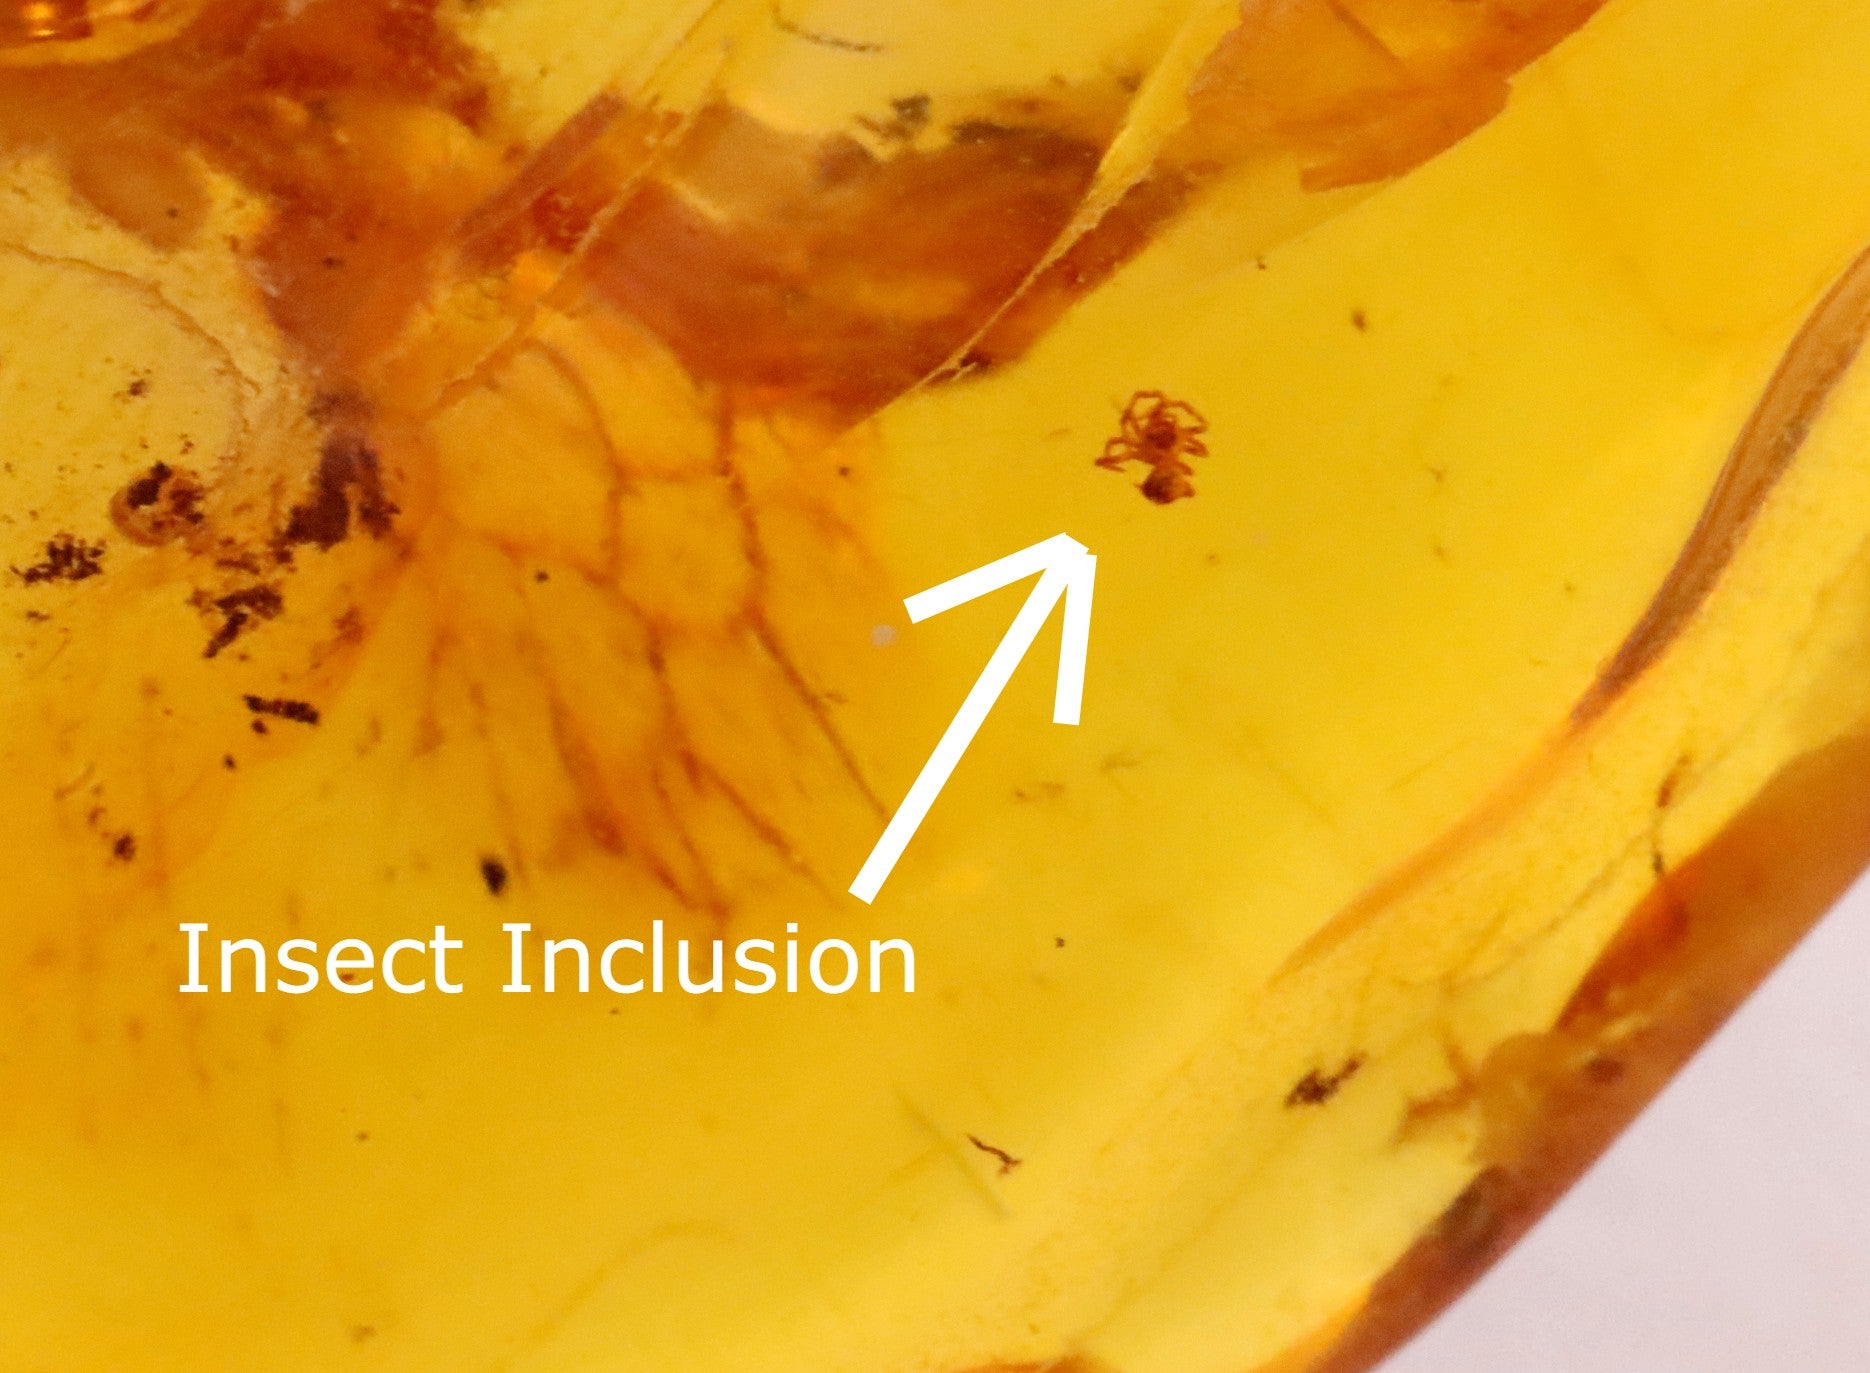 40 Million year Old Baltic Amber With Insect Inclusion